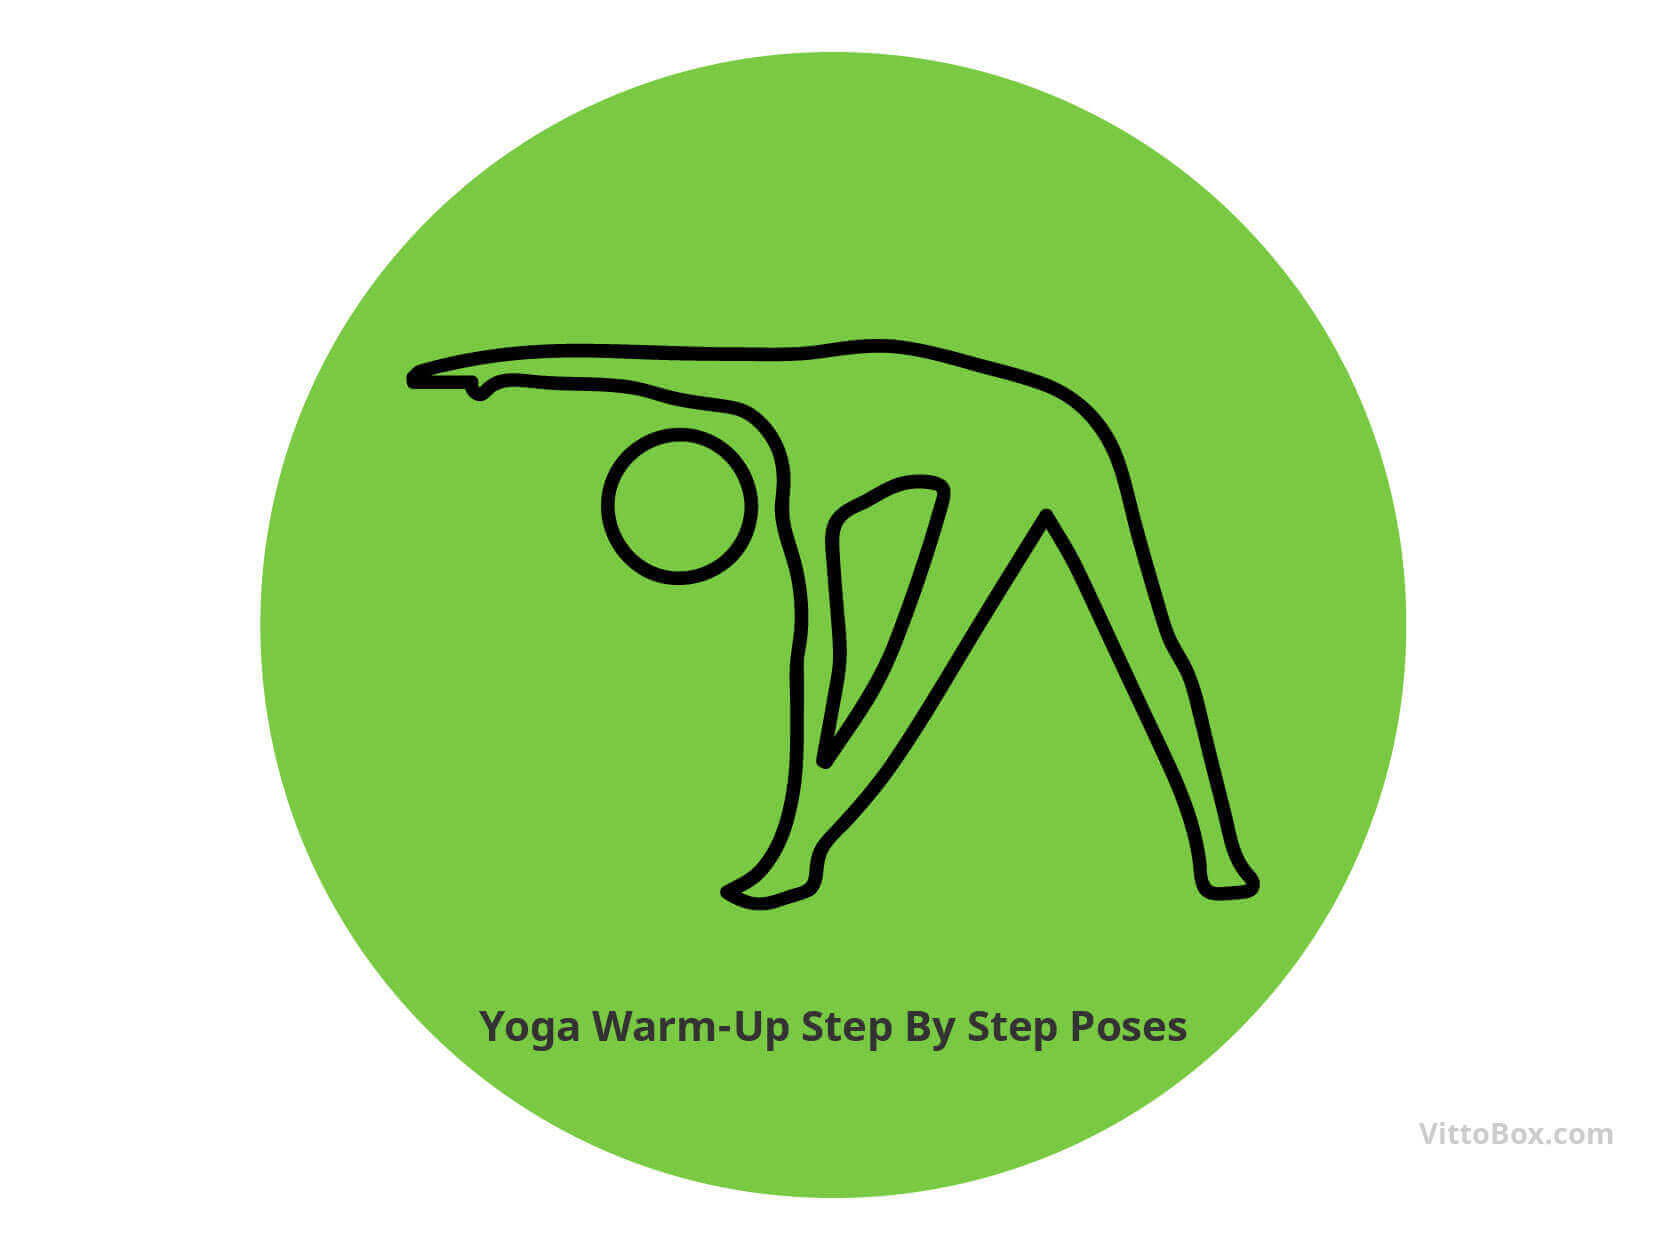 Is it necessary to warm up muscles before yoga? - Quora